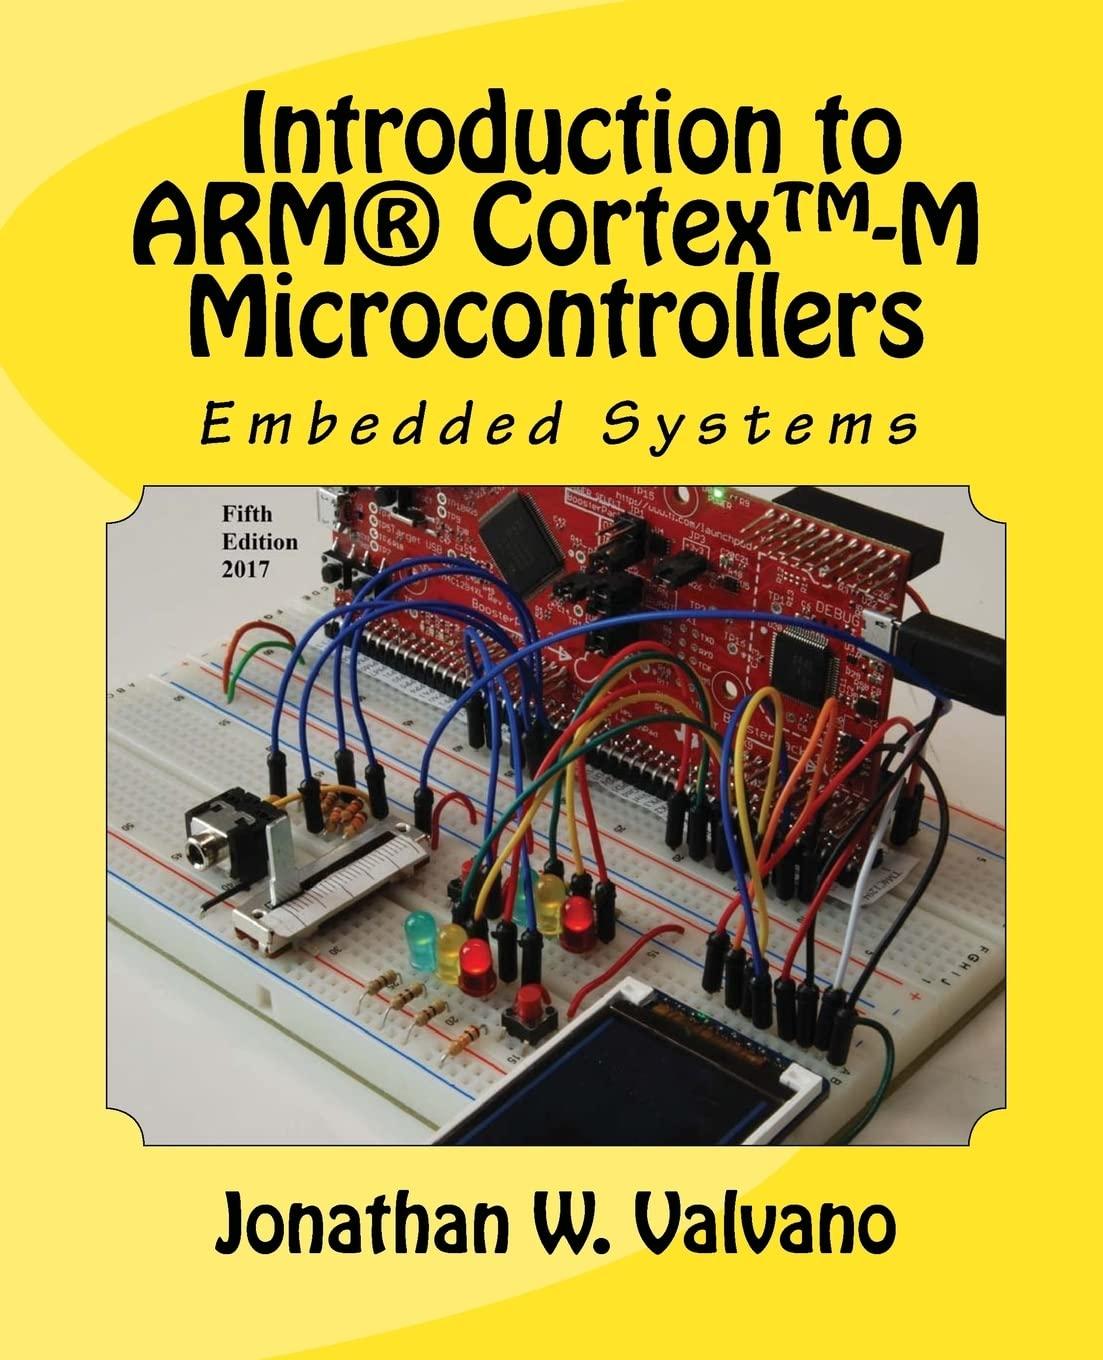 embedded systems  introduction to arm® cortex™ m microcontrollers 5th edition jonathan w valvano